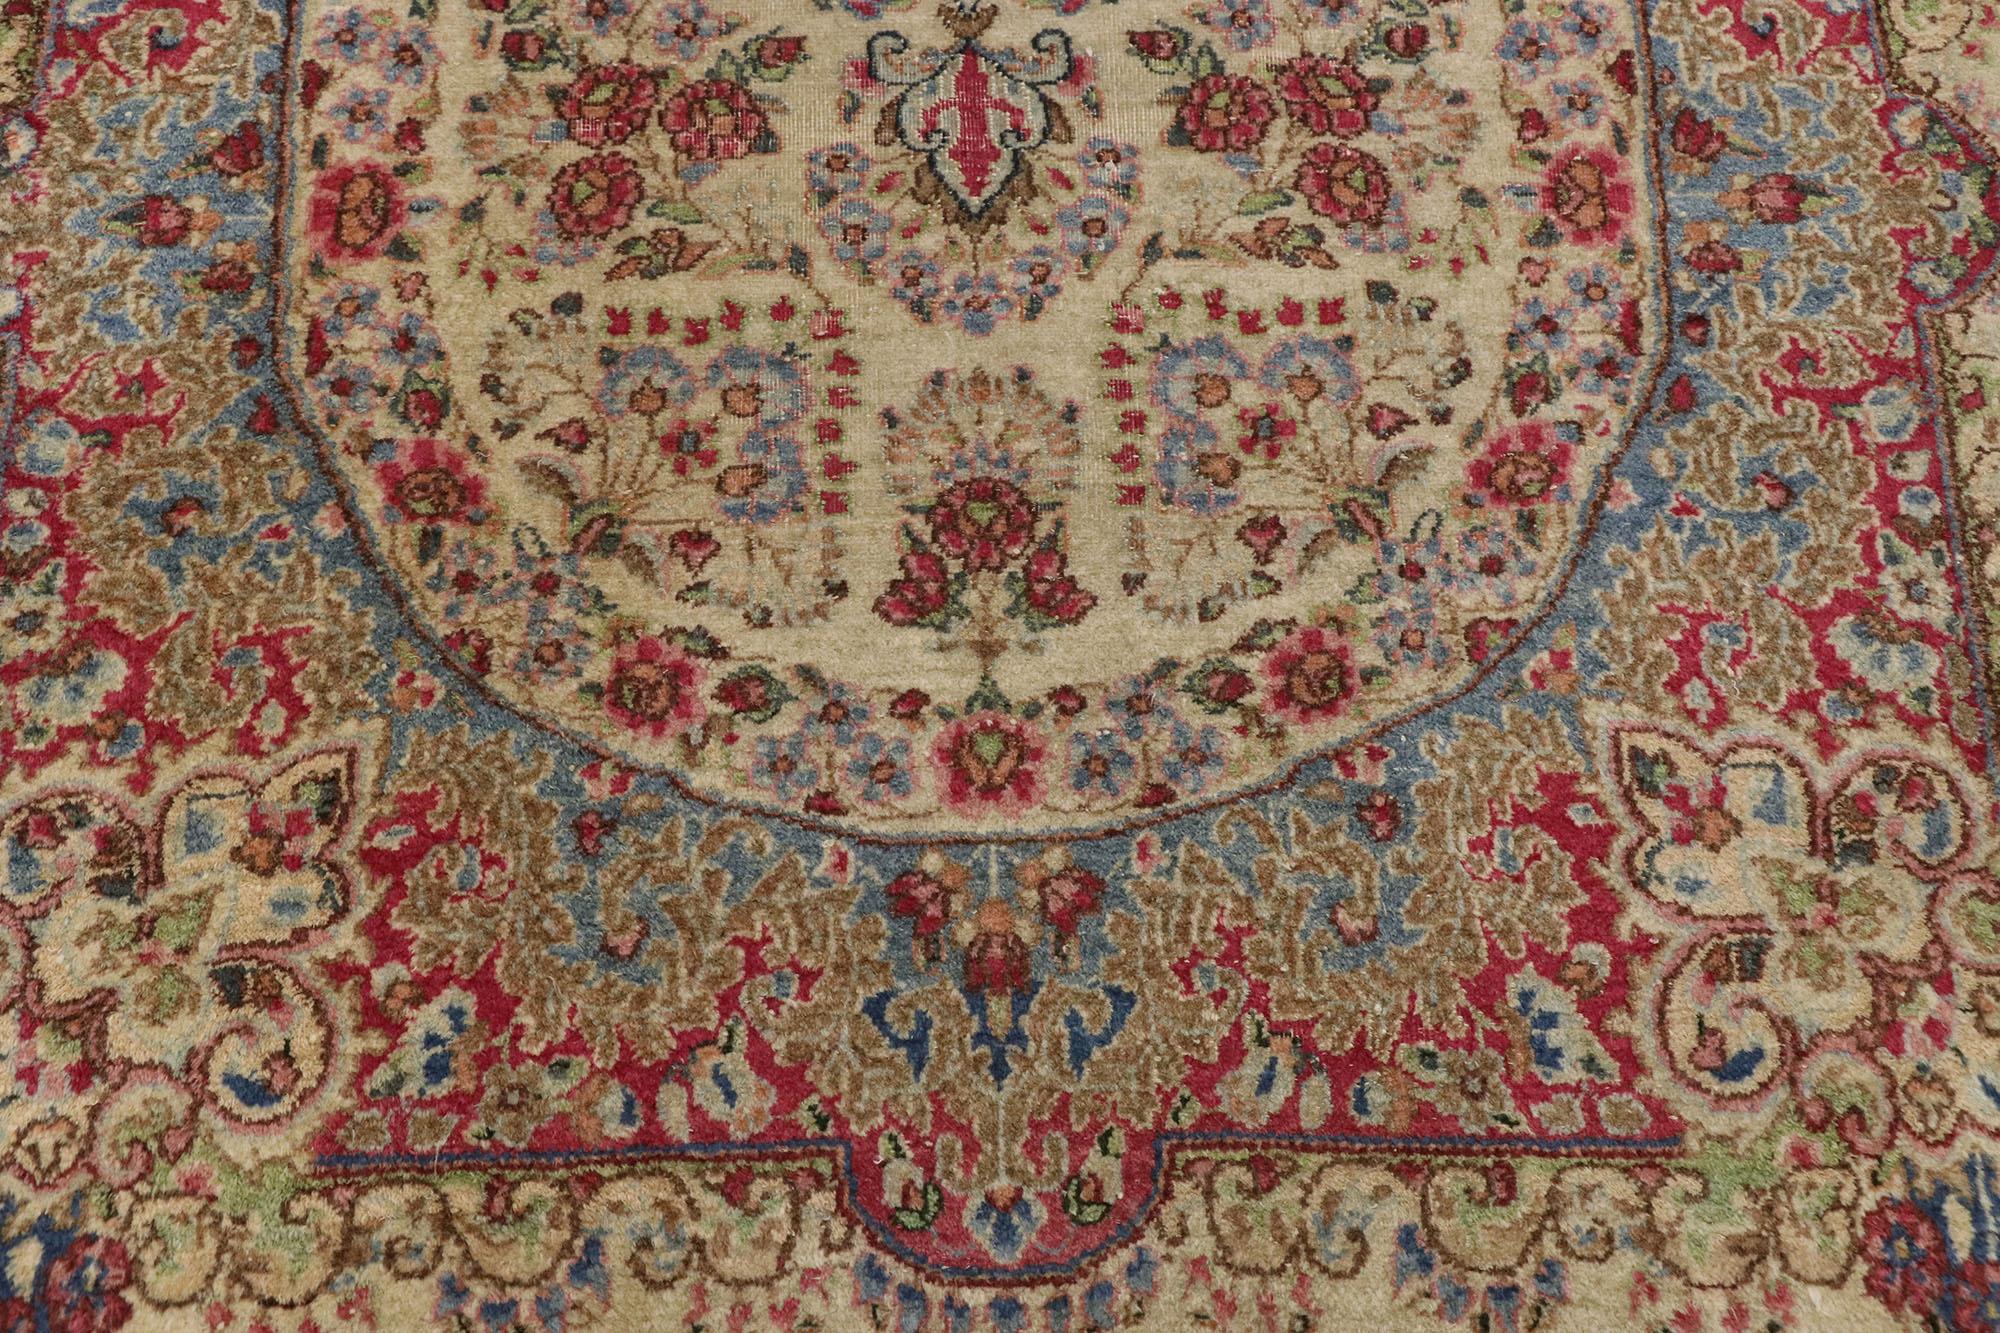 Hand-Knotted Distressed Antique Persian Kerman Rug with Shabby Chic Rustic French Style For Sale